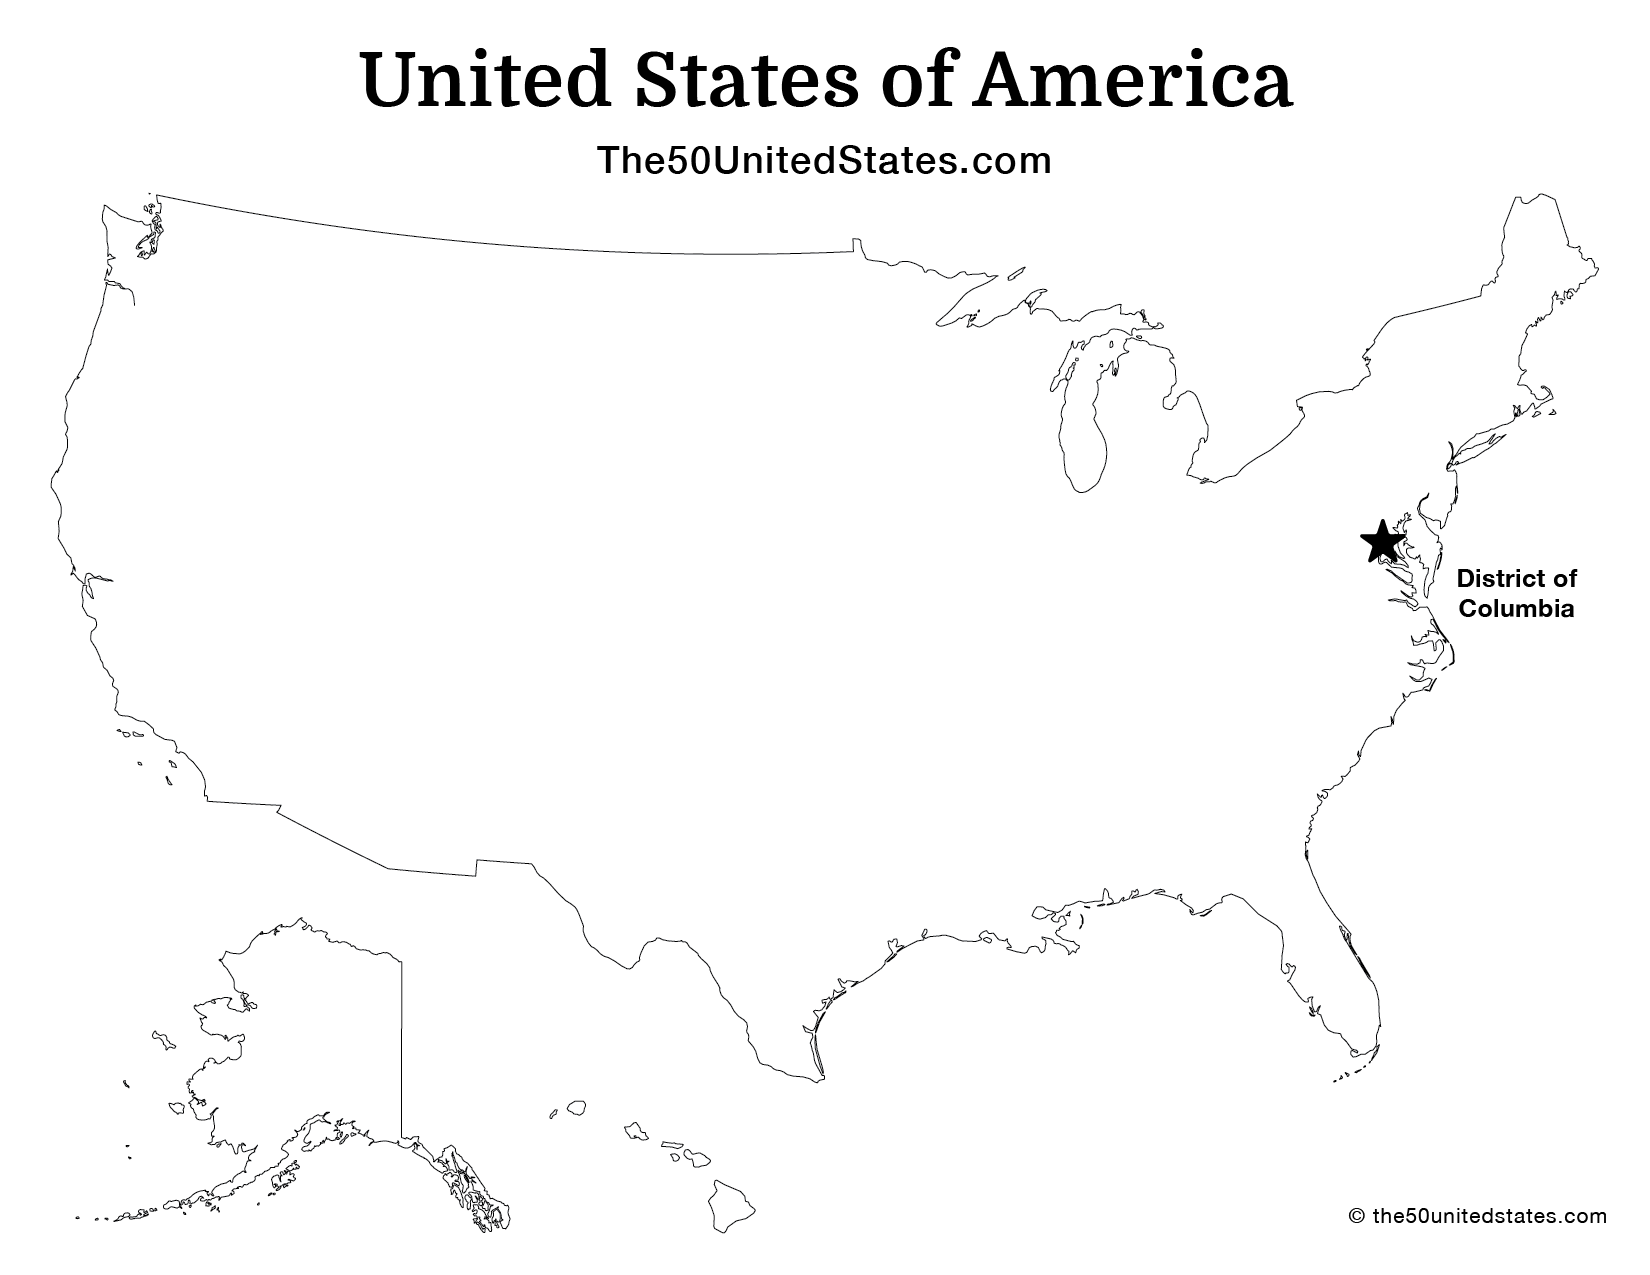 USA with Capital (Labeled)